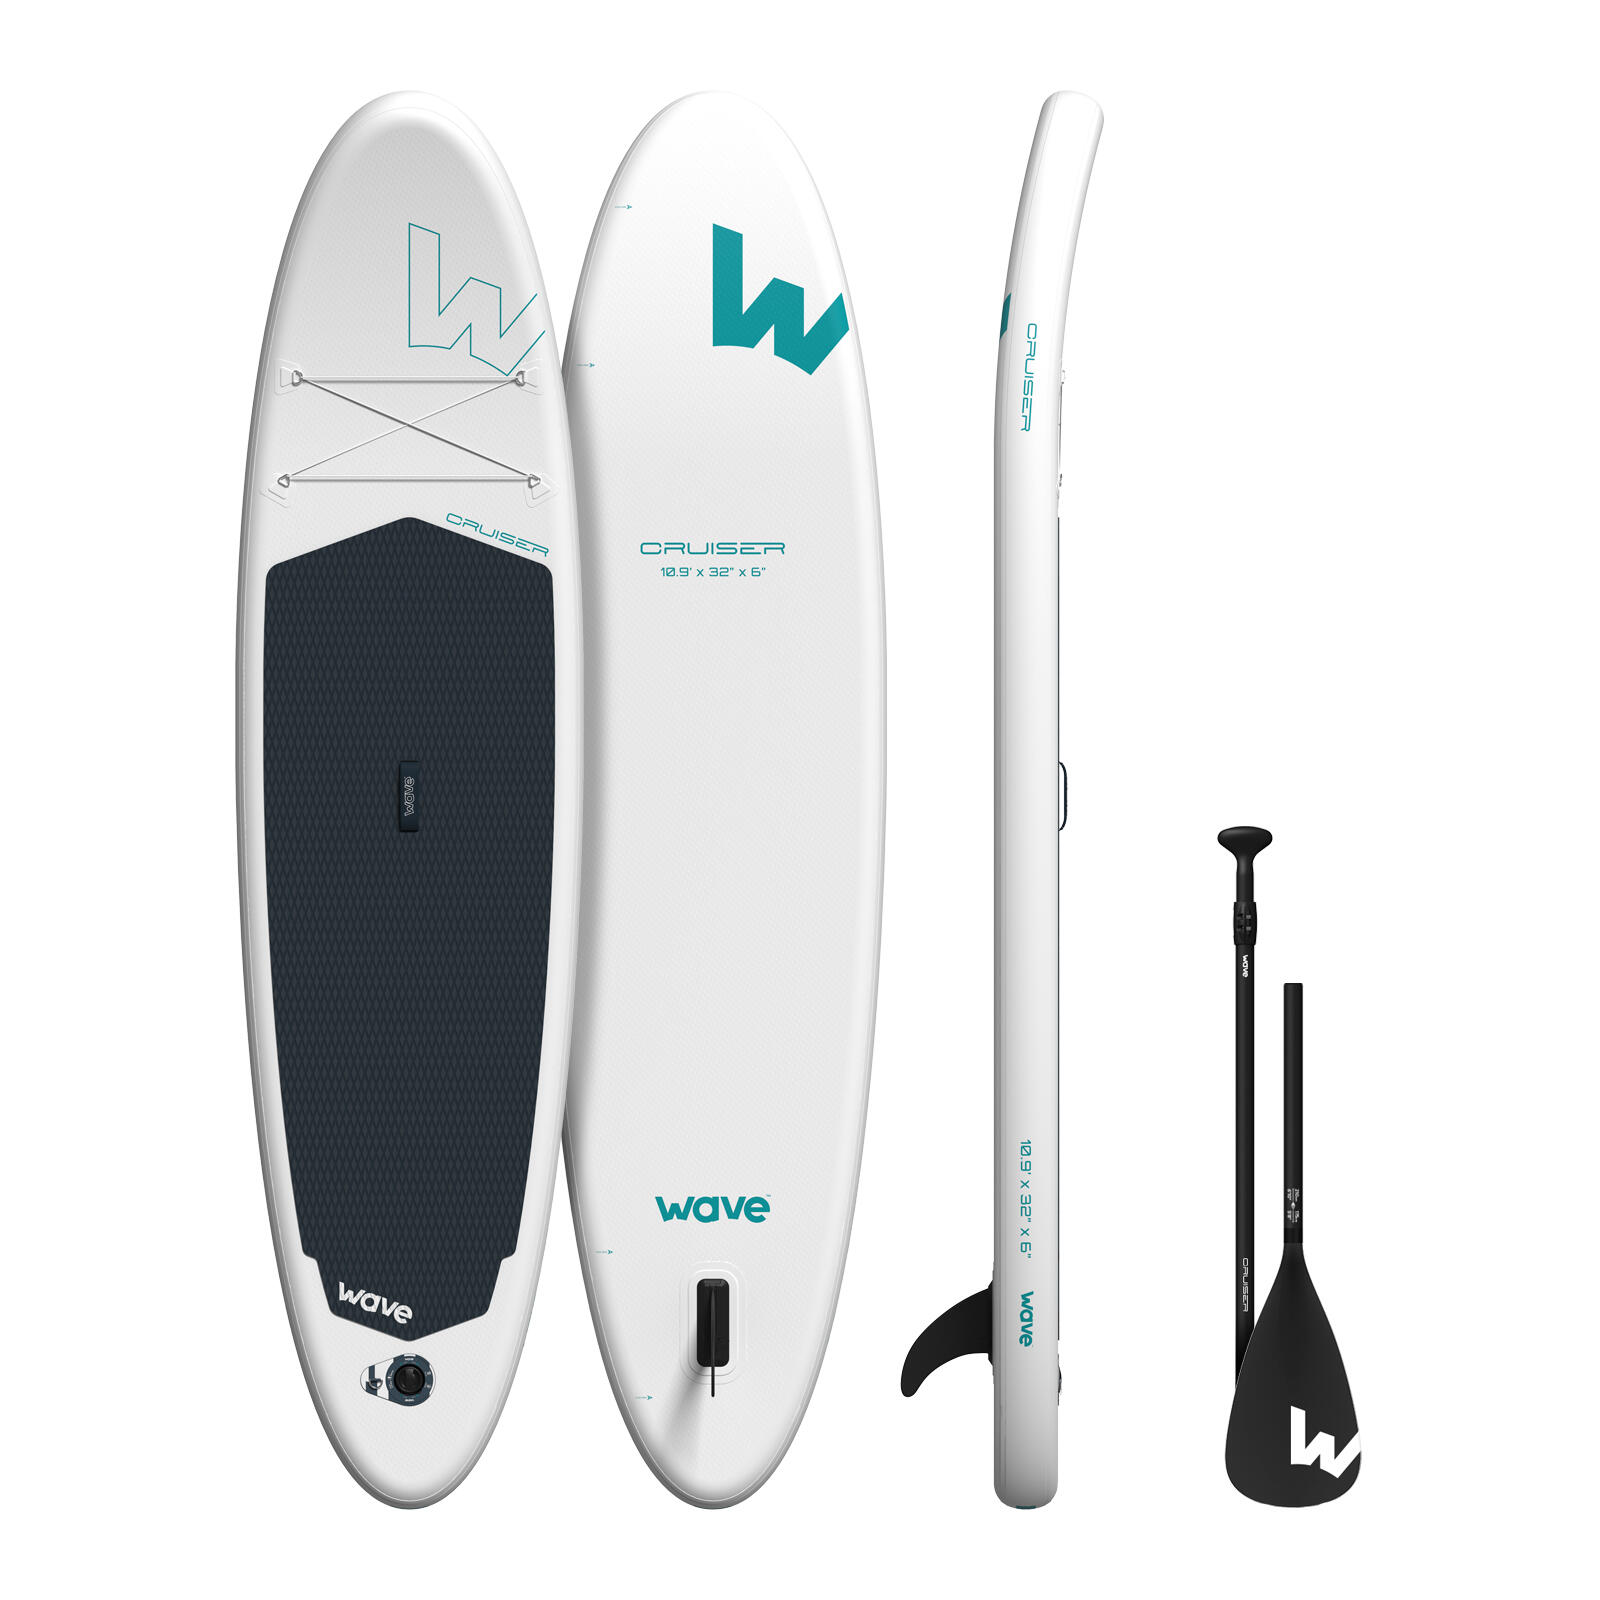 WAVE DIRECT Wave Cruiser 2.0 SUP Inflatable Paddleboard